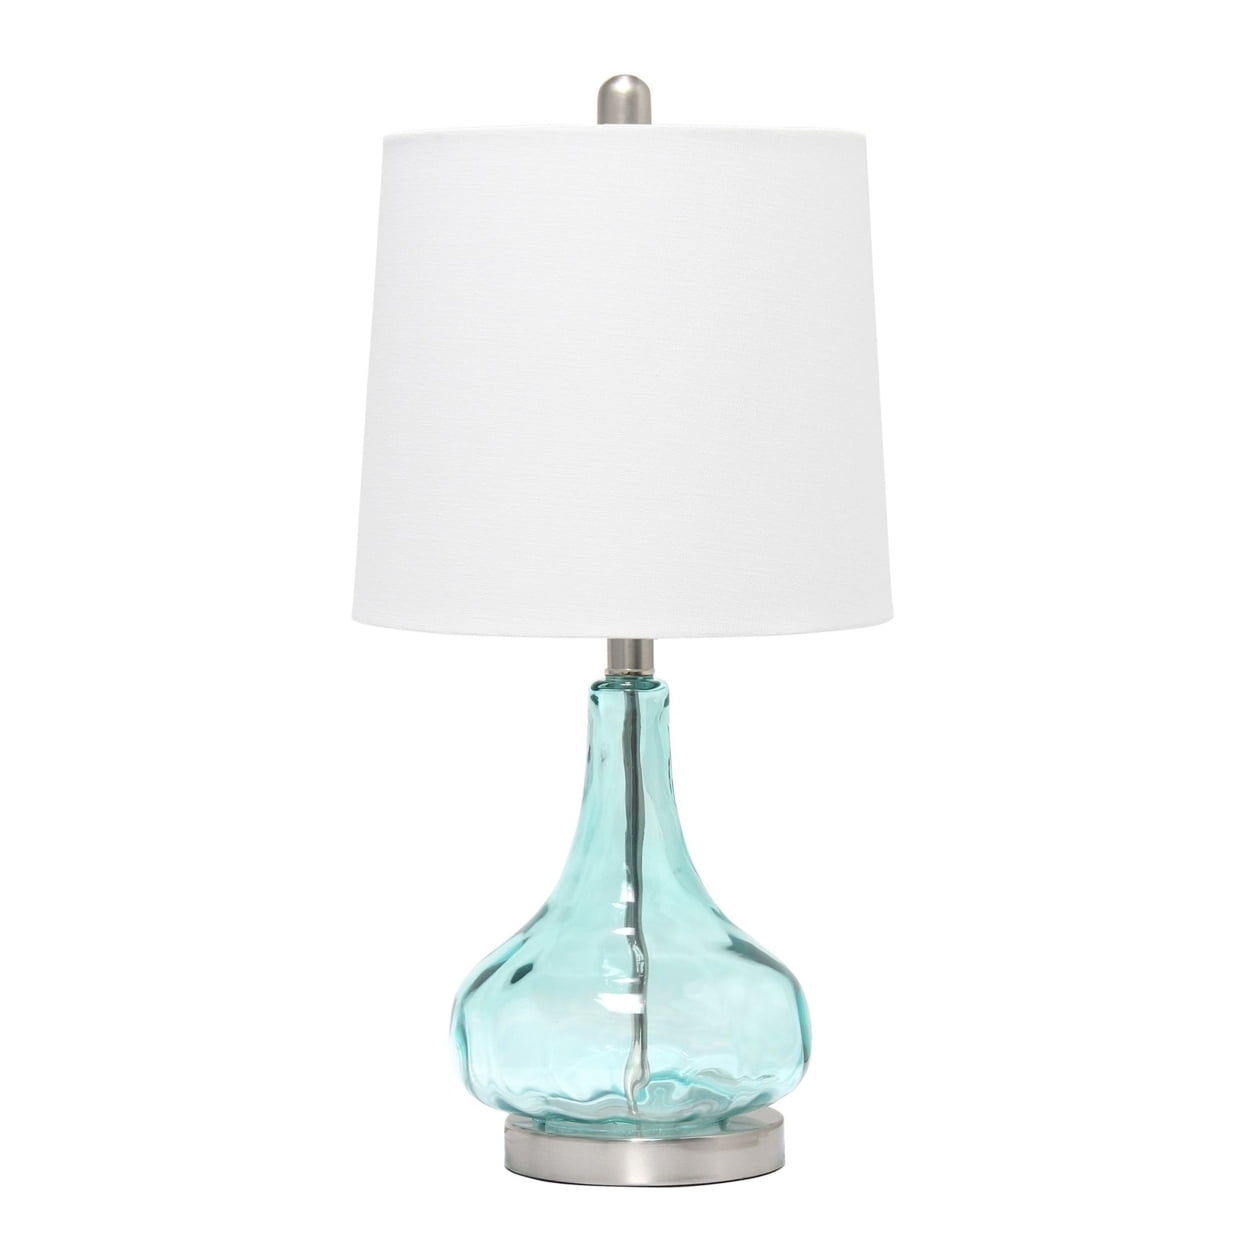 Lalia Home Rippled Glass Table Lamp with Fabric Shade, Blue